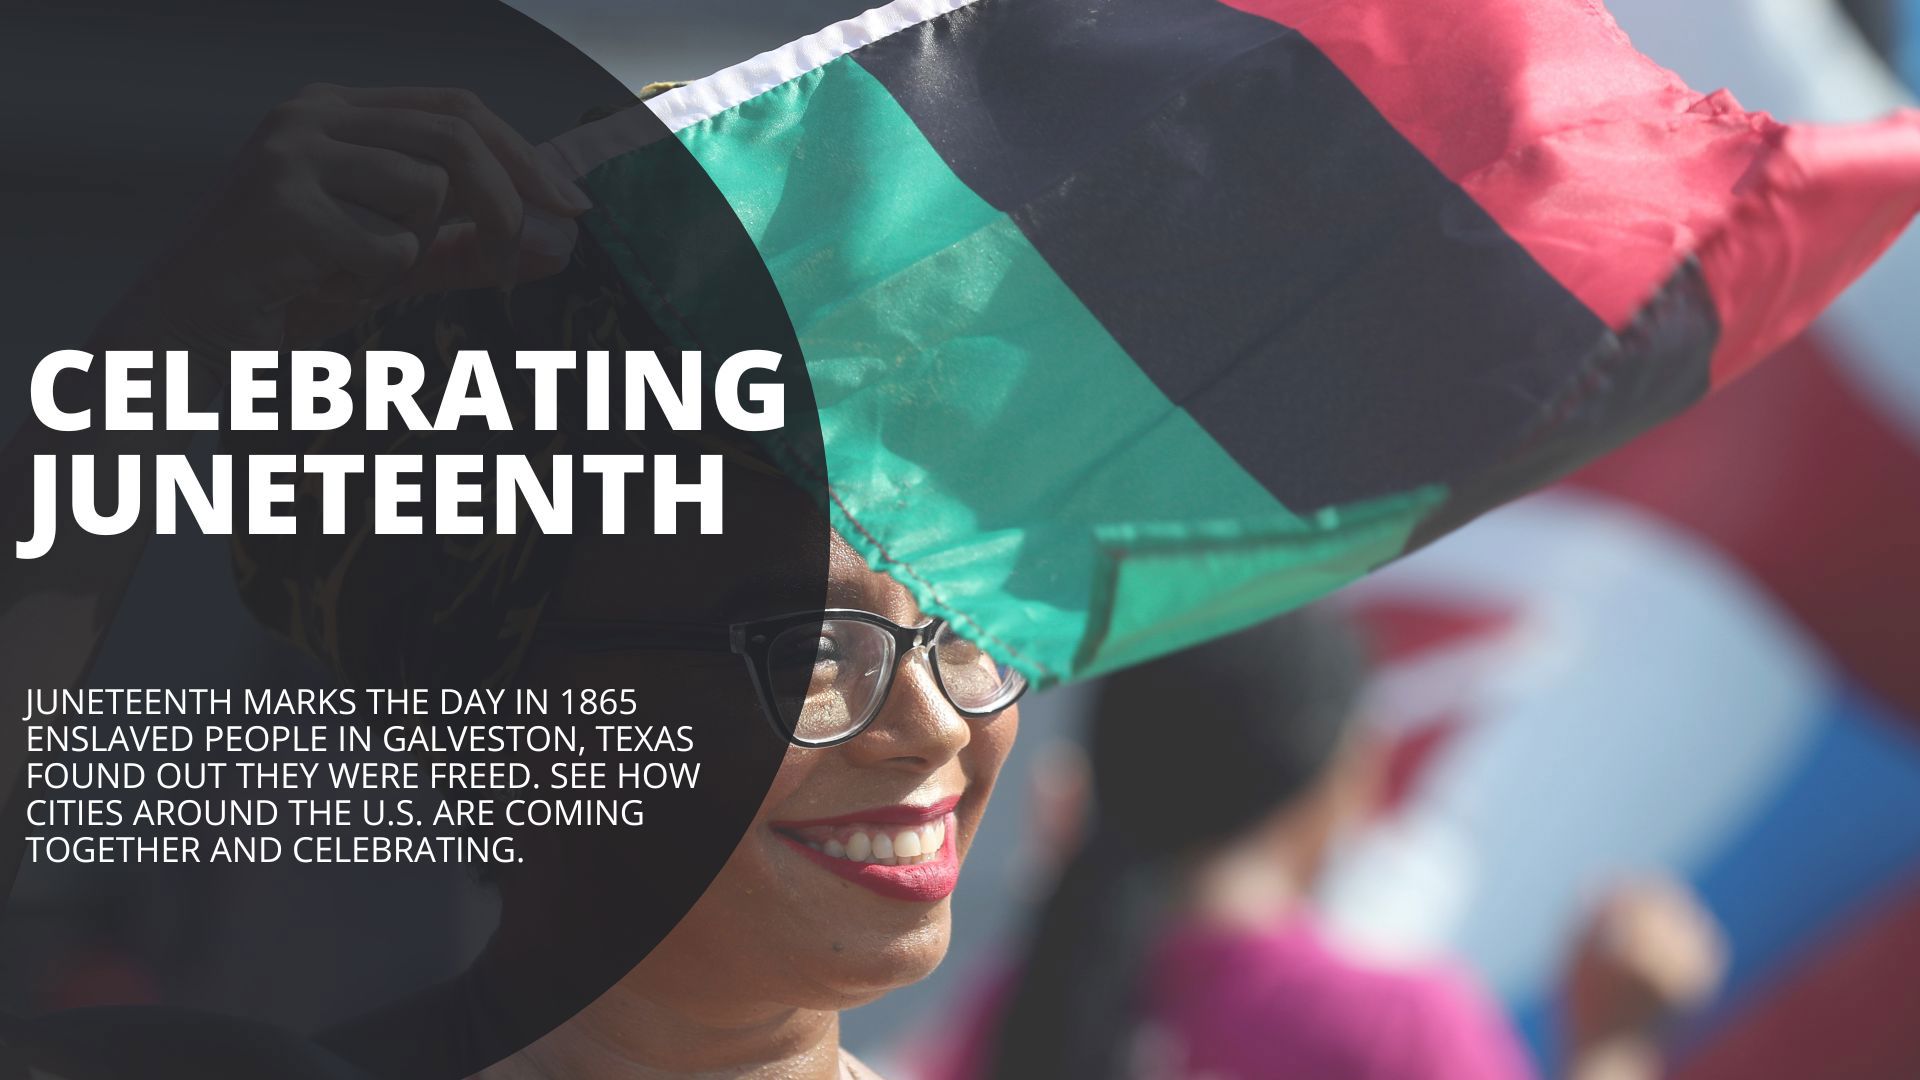 Juneteenth marks the day in 1865 enslaved people in Galveston, Texas found out they were freed. See how cities around the U.S. are coming together and celebrating.